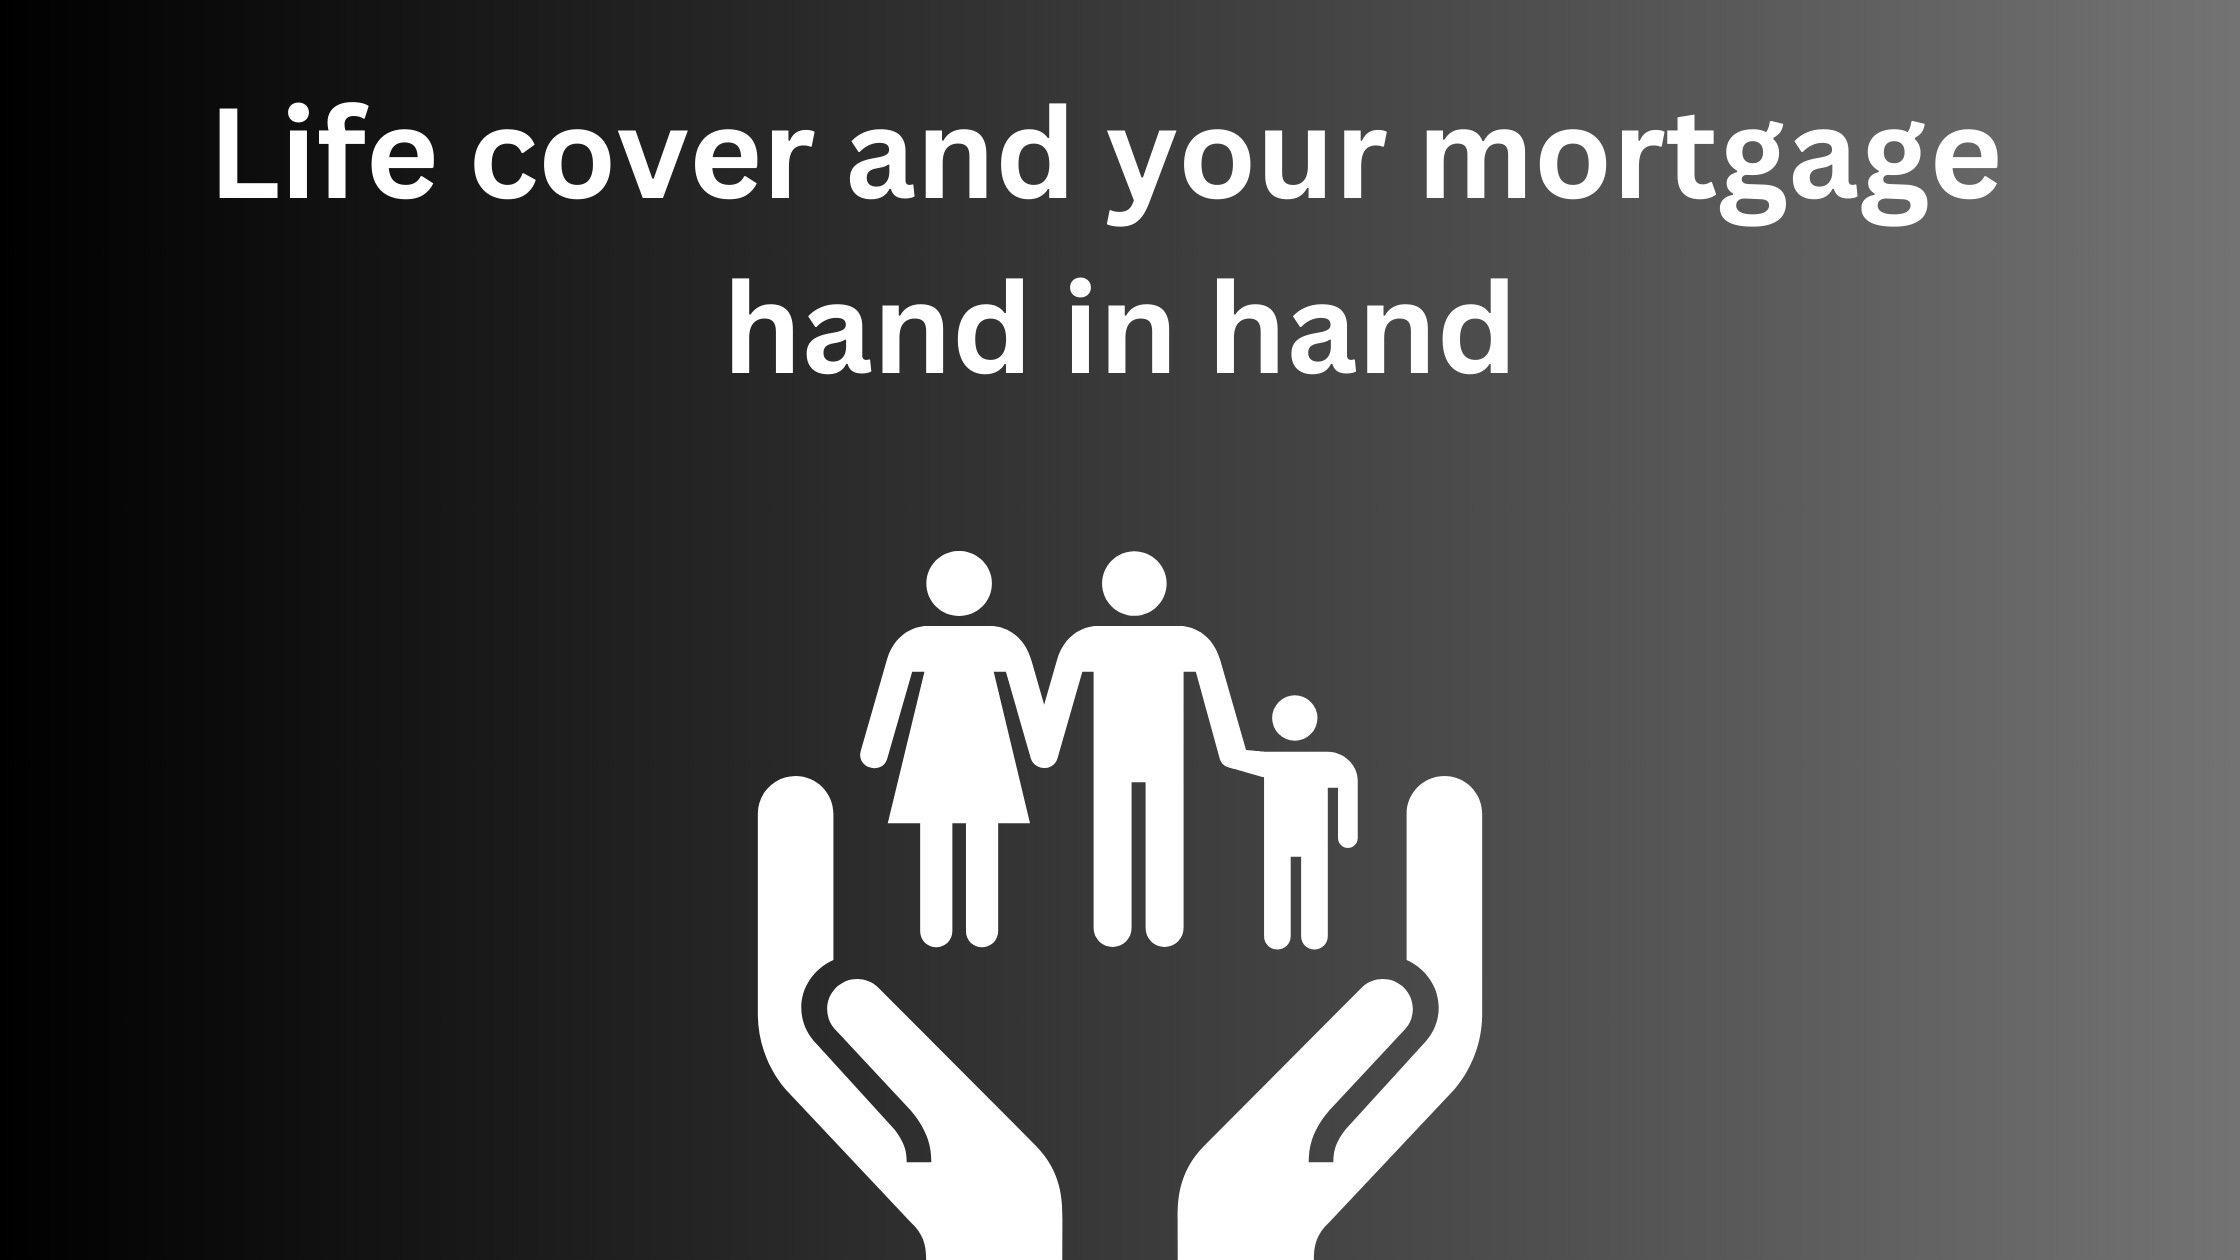 Life cover and your mortgage – hand in hand